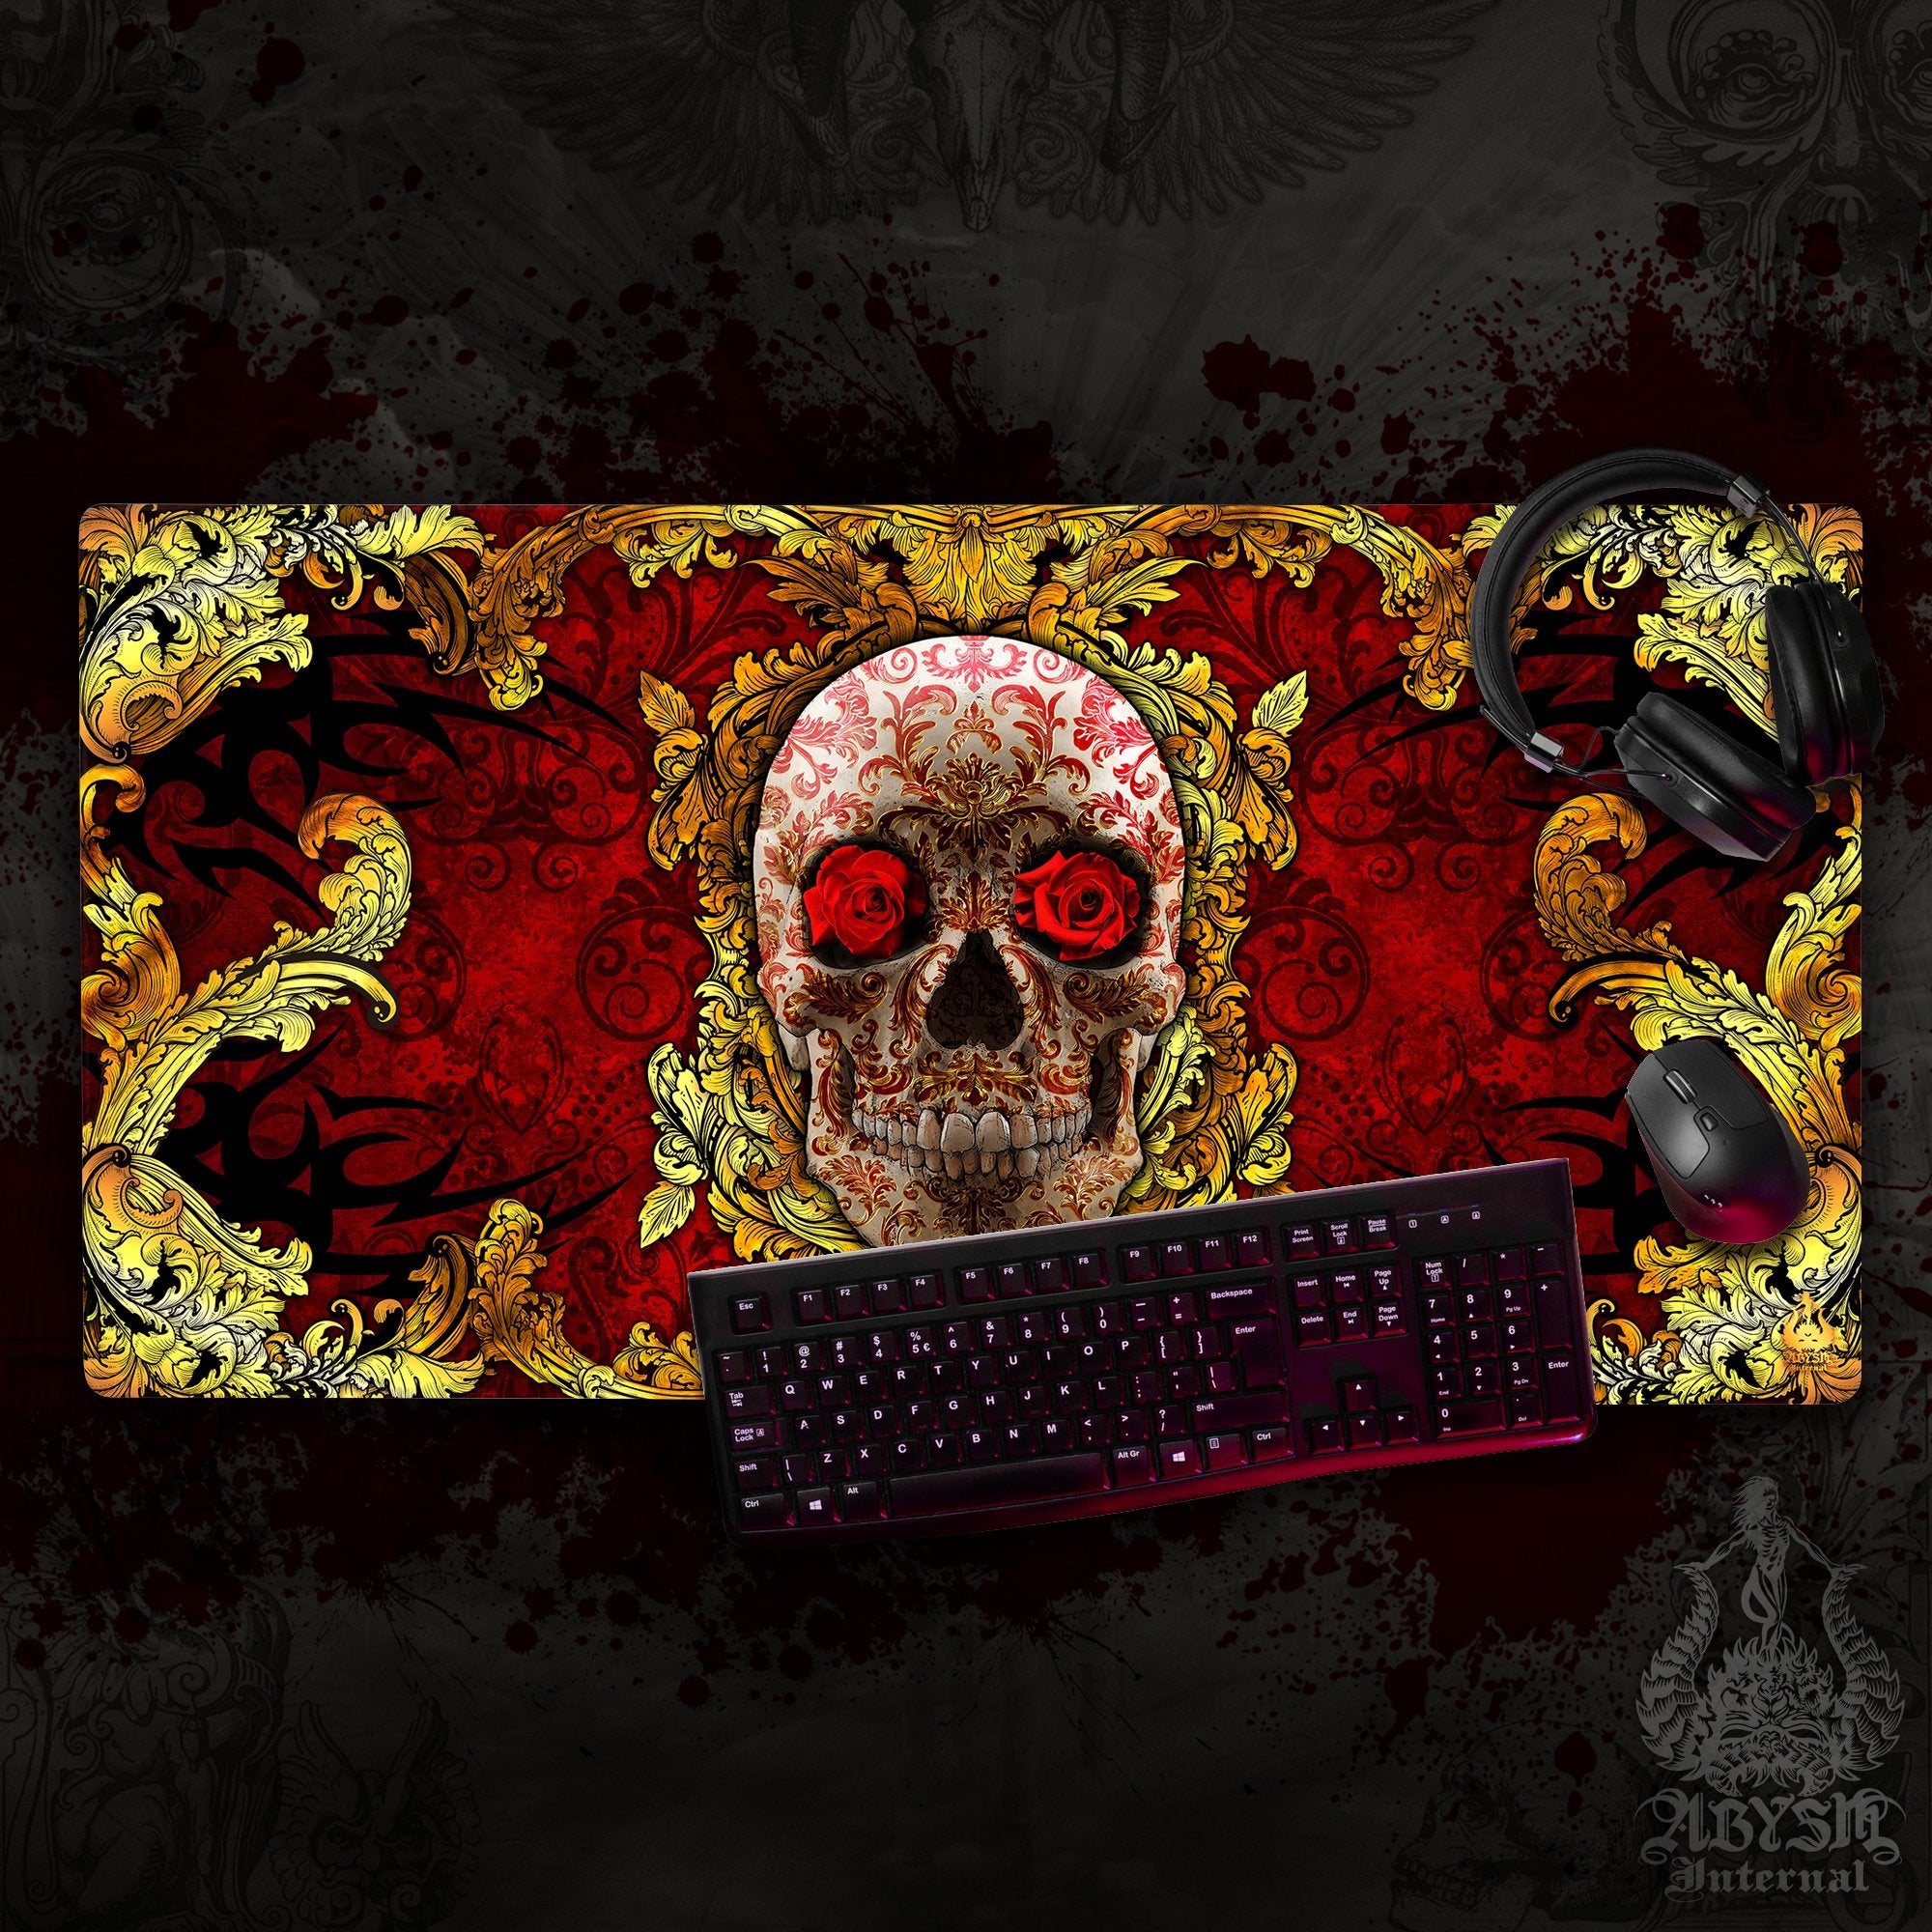 Gold Skull Desk Mat, Ornamented Gaming Mouse Pad, Vintage Table Protector Cover, Baroque Workpad, Art Print - Red - Abysm Internal